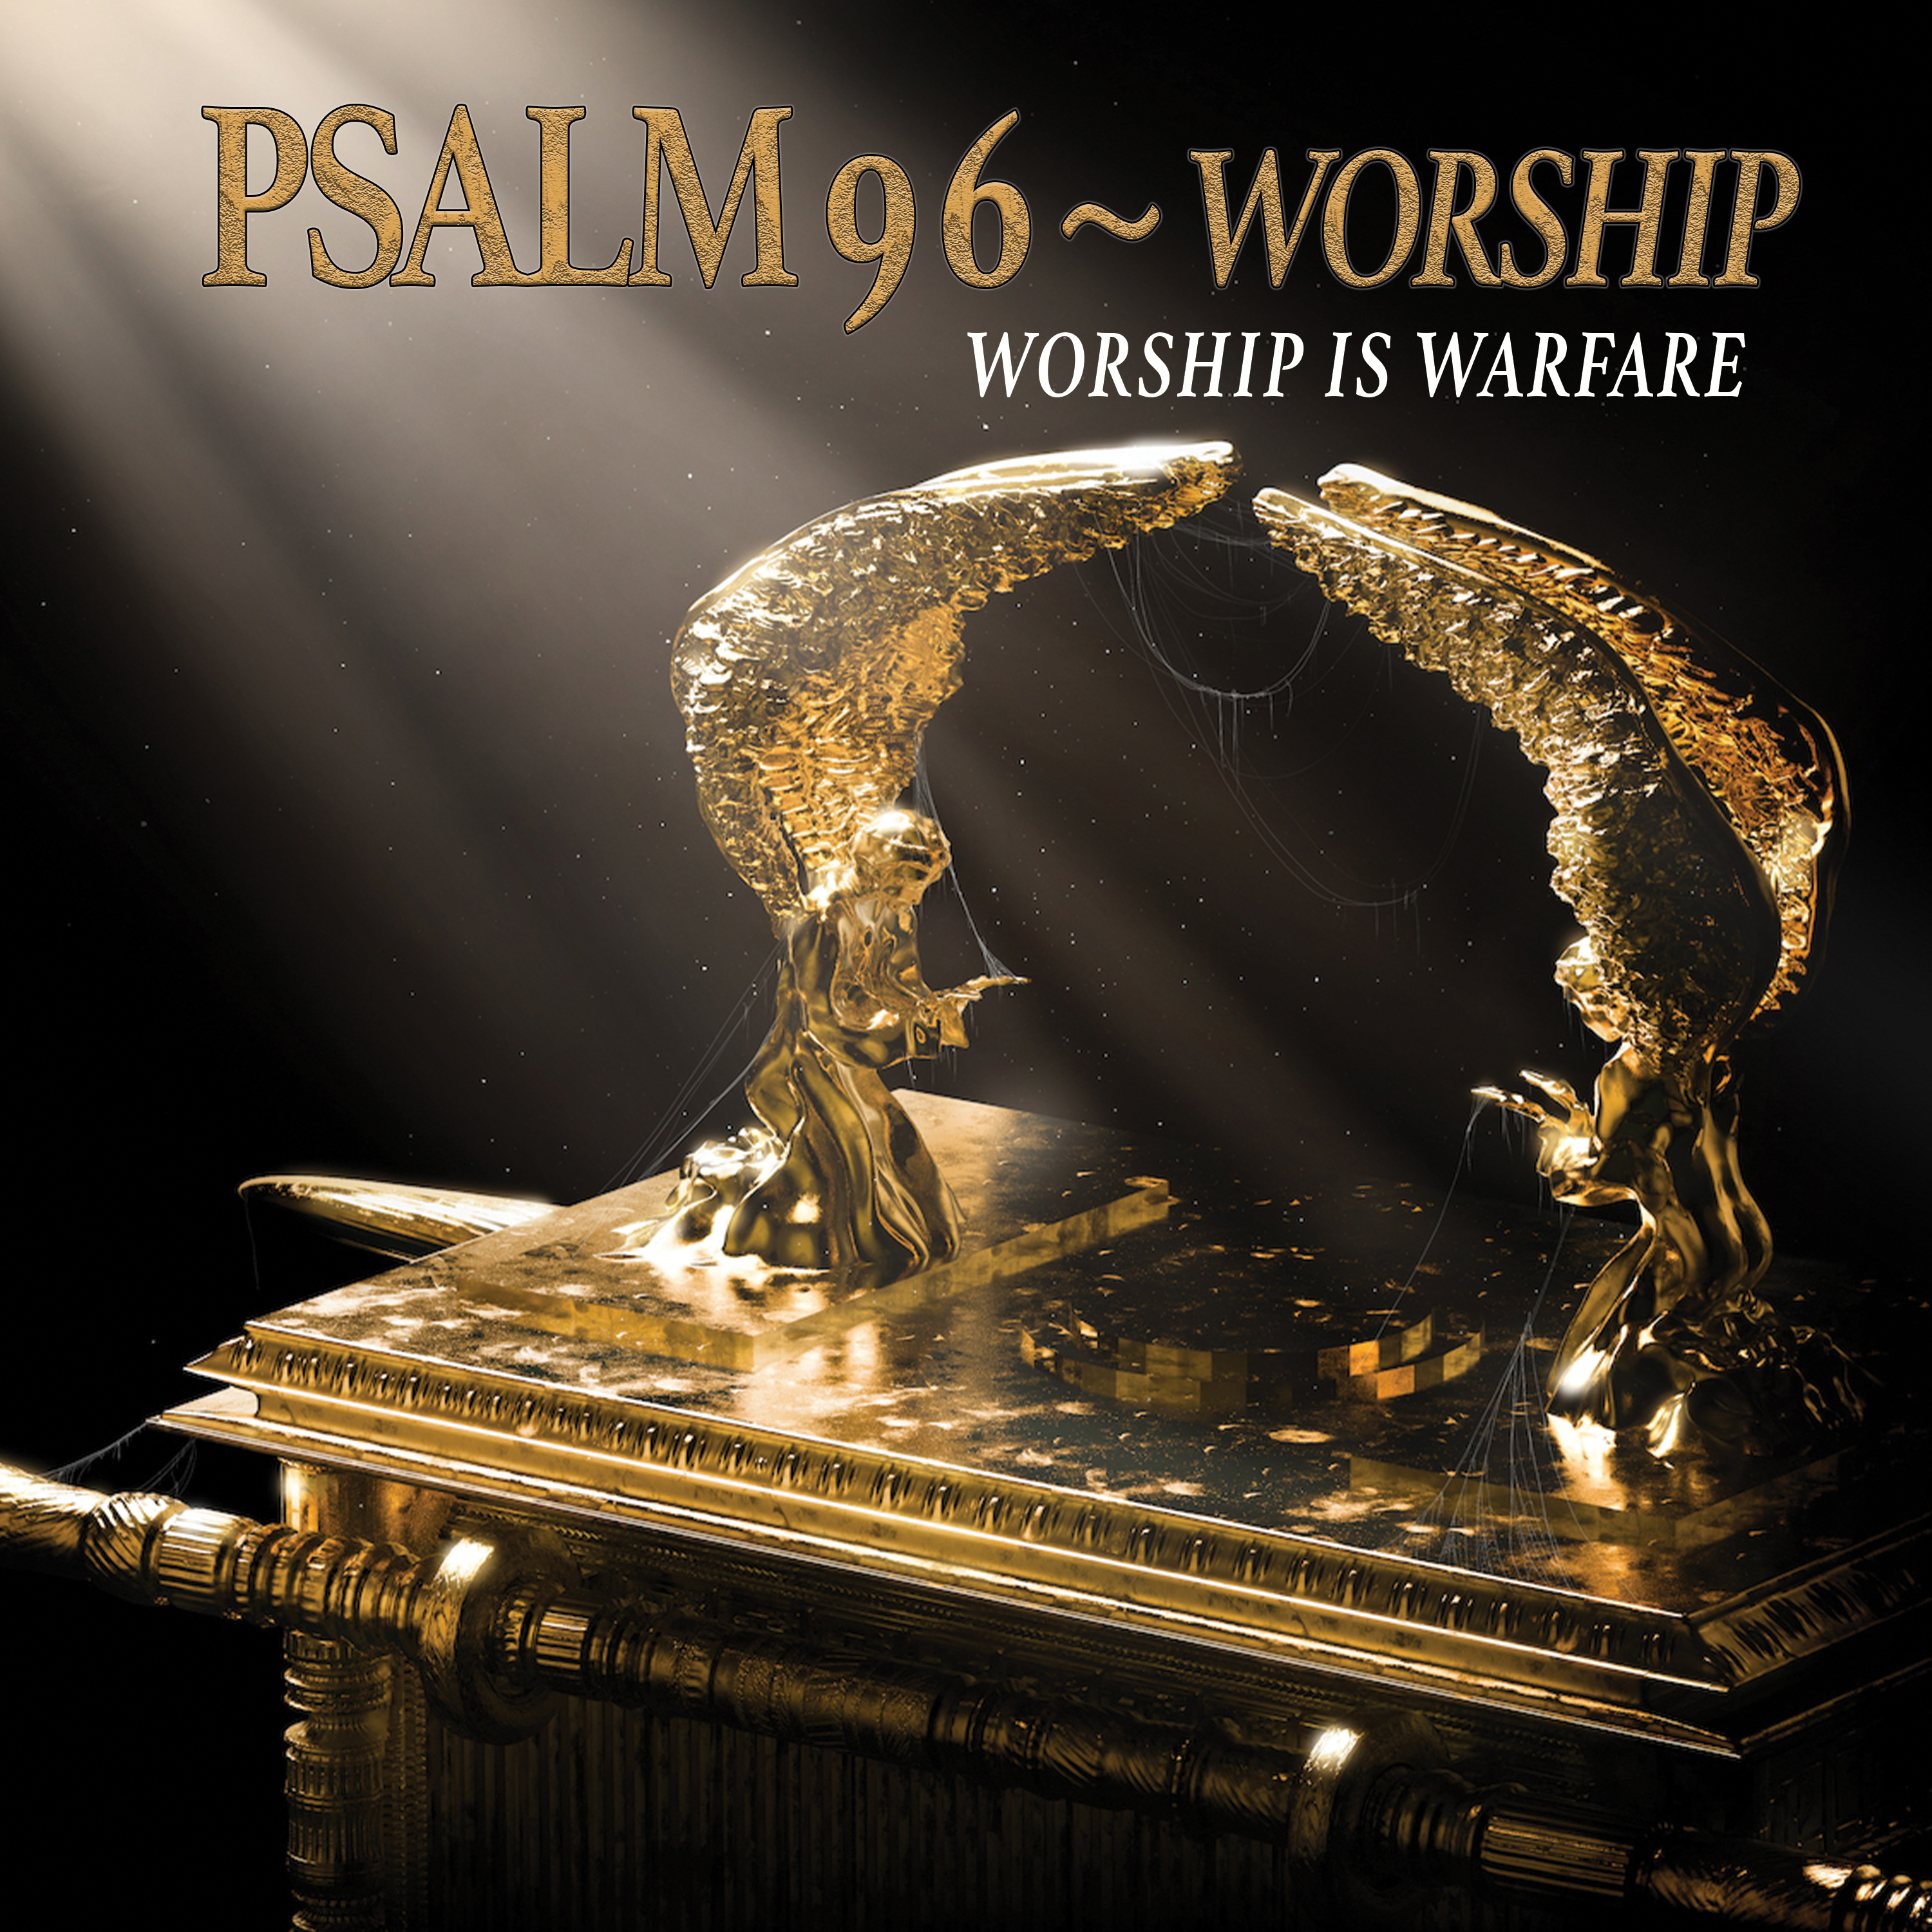 Art for Worship Is Warfare by Psalm 96 Worship